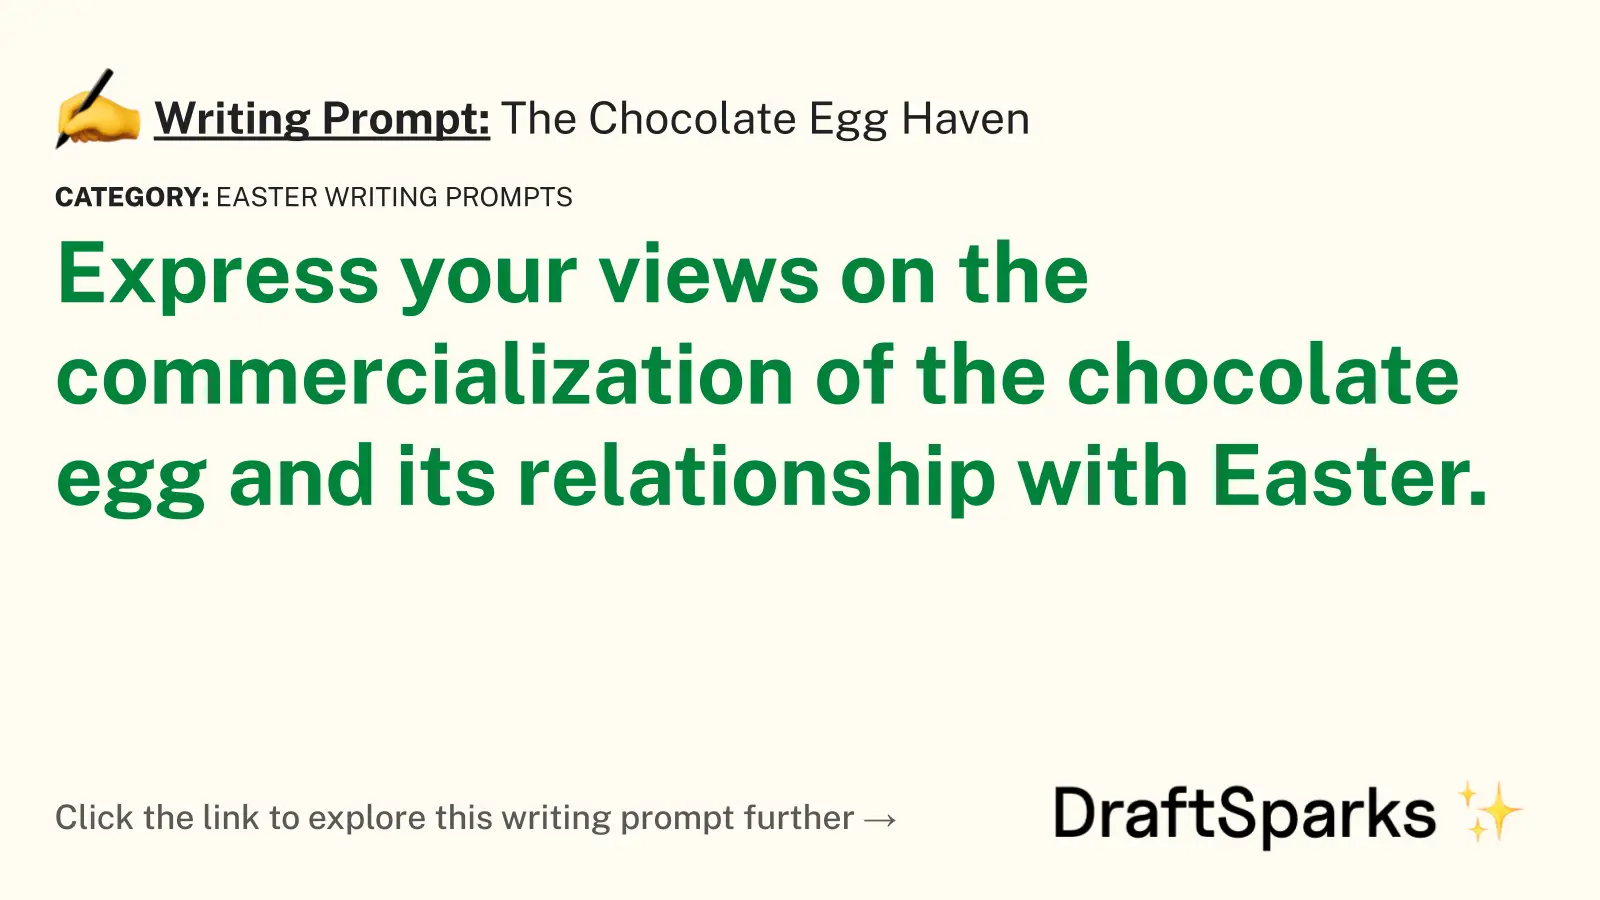 The Chocolate Egg Haven